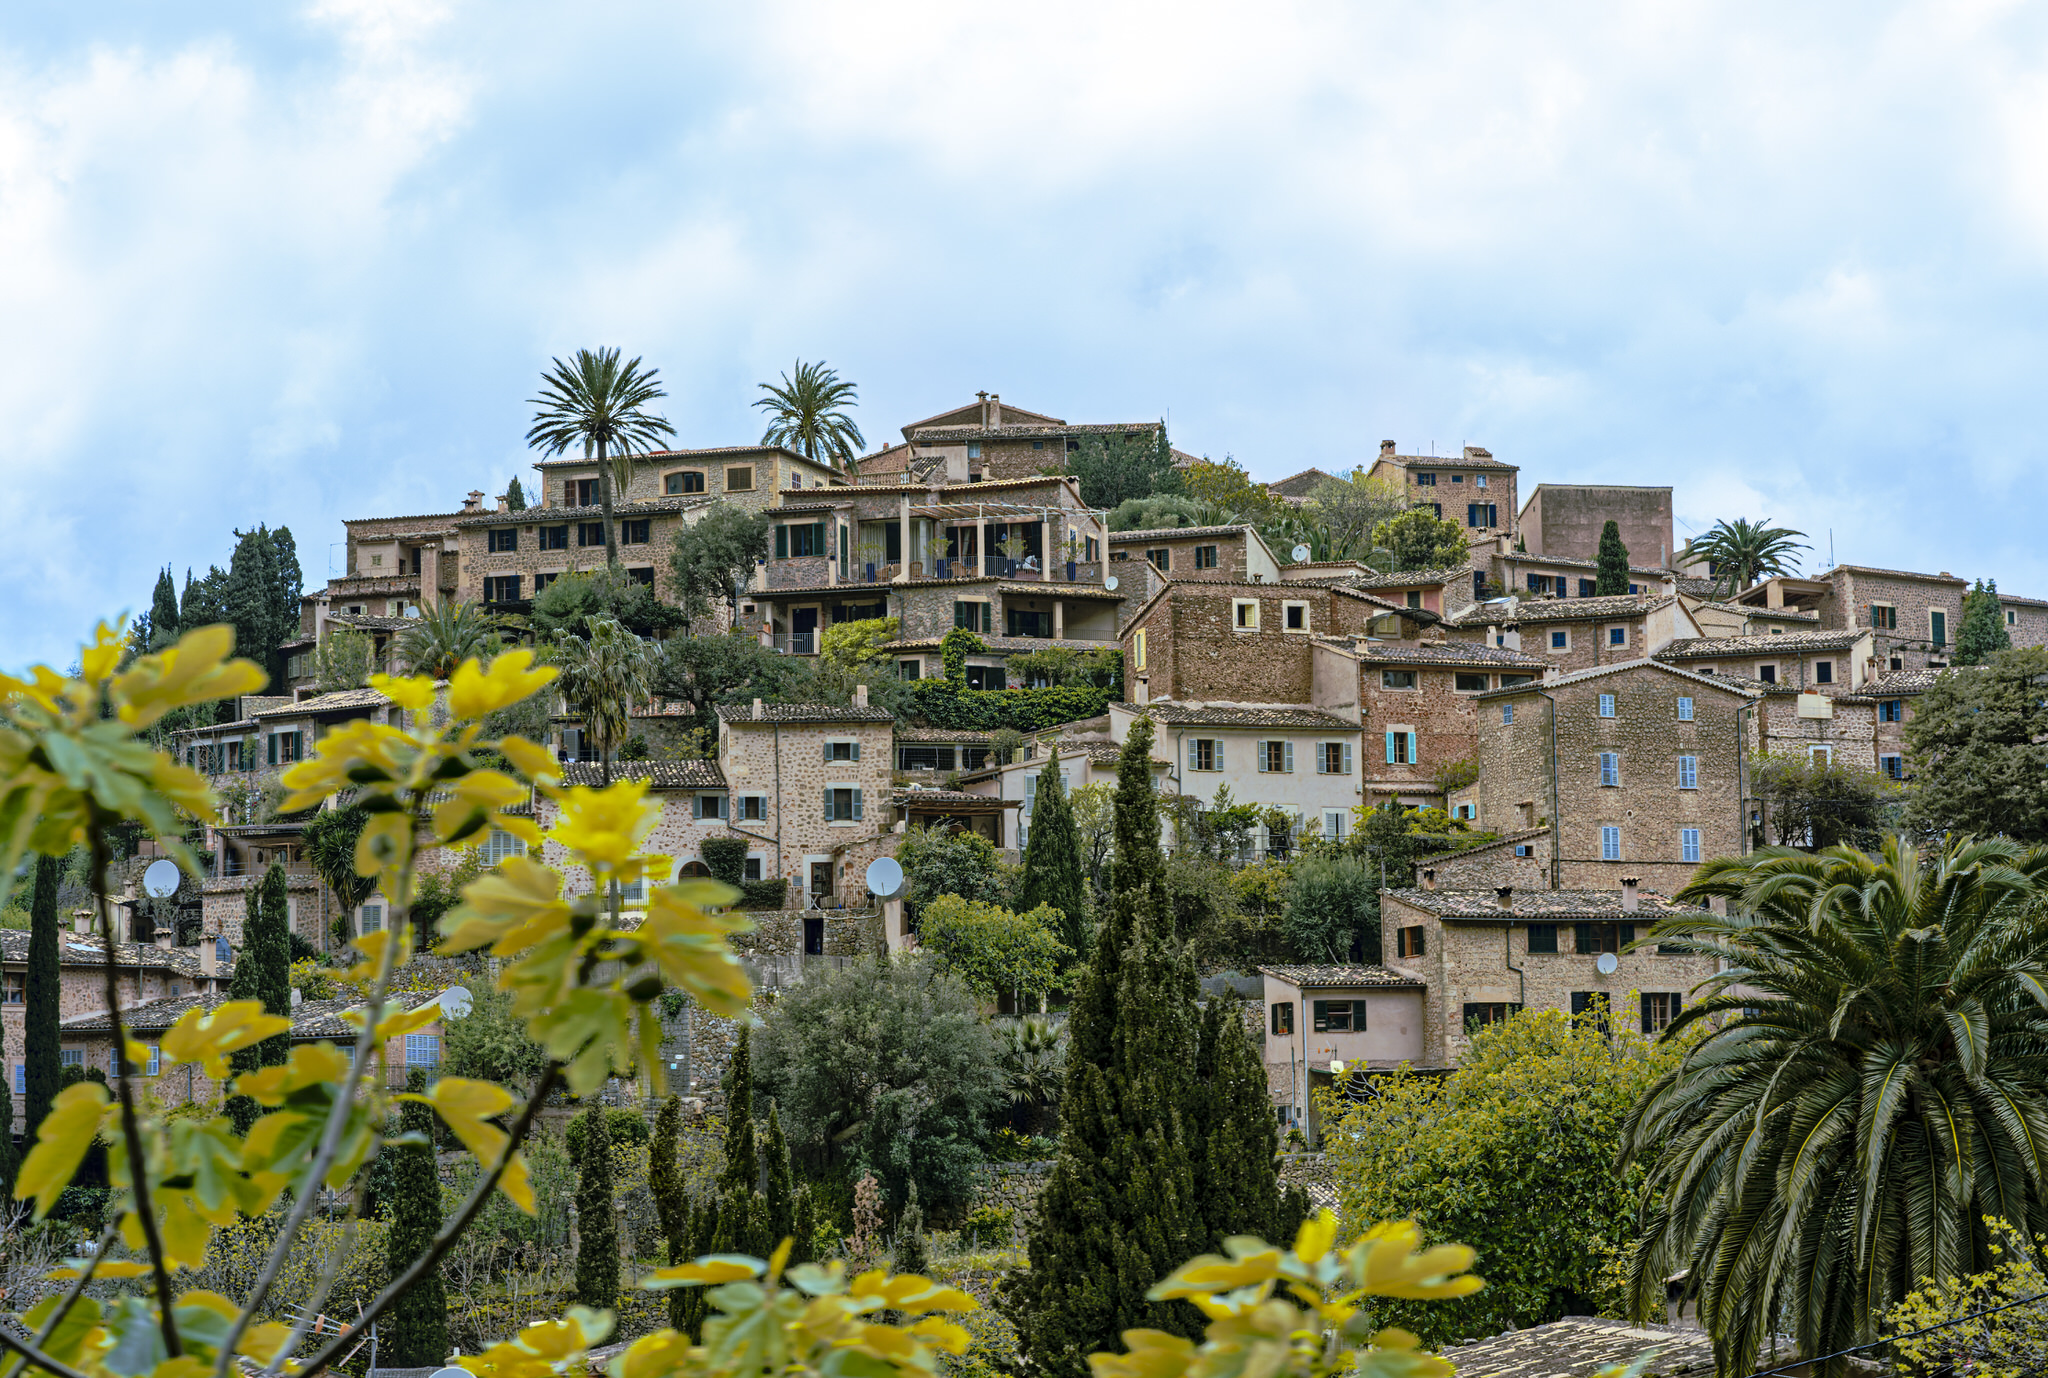 Photograph of the views from the Valldemossa viewpoint